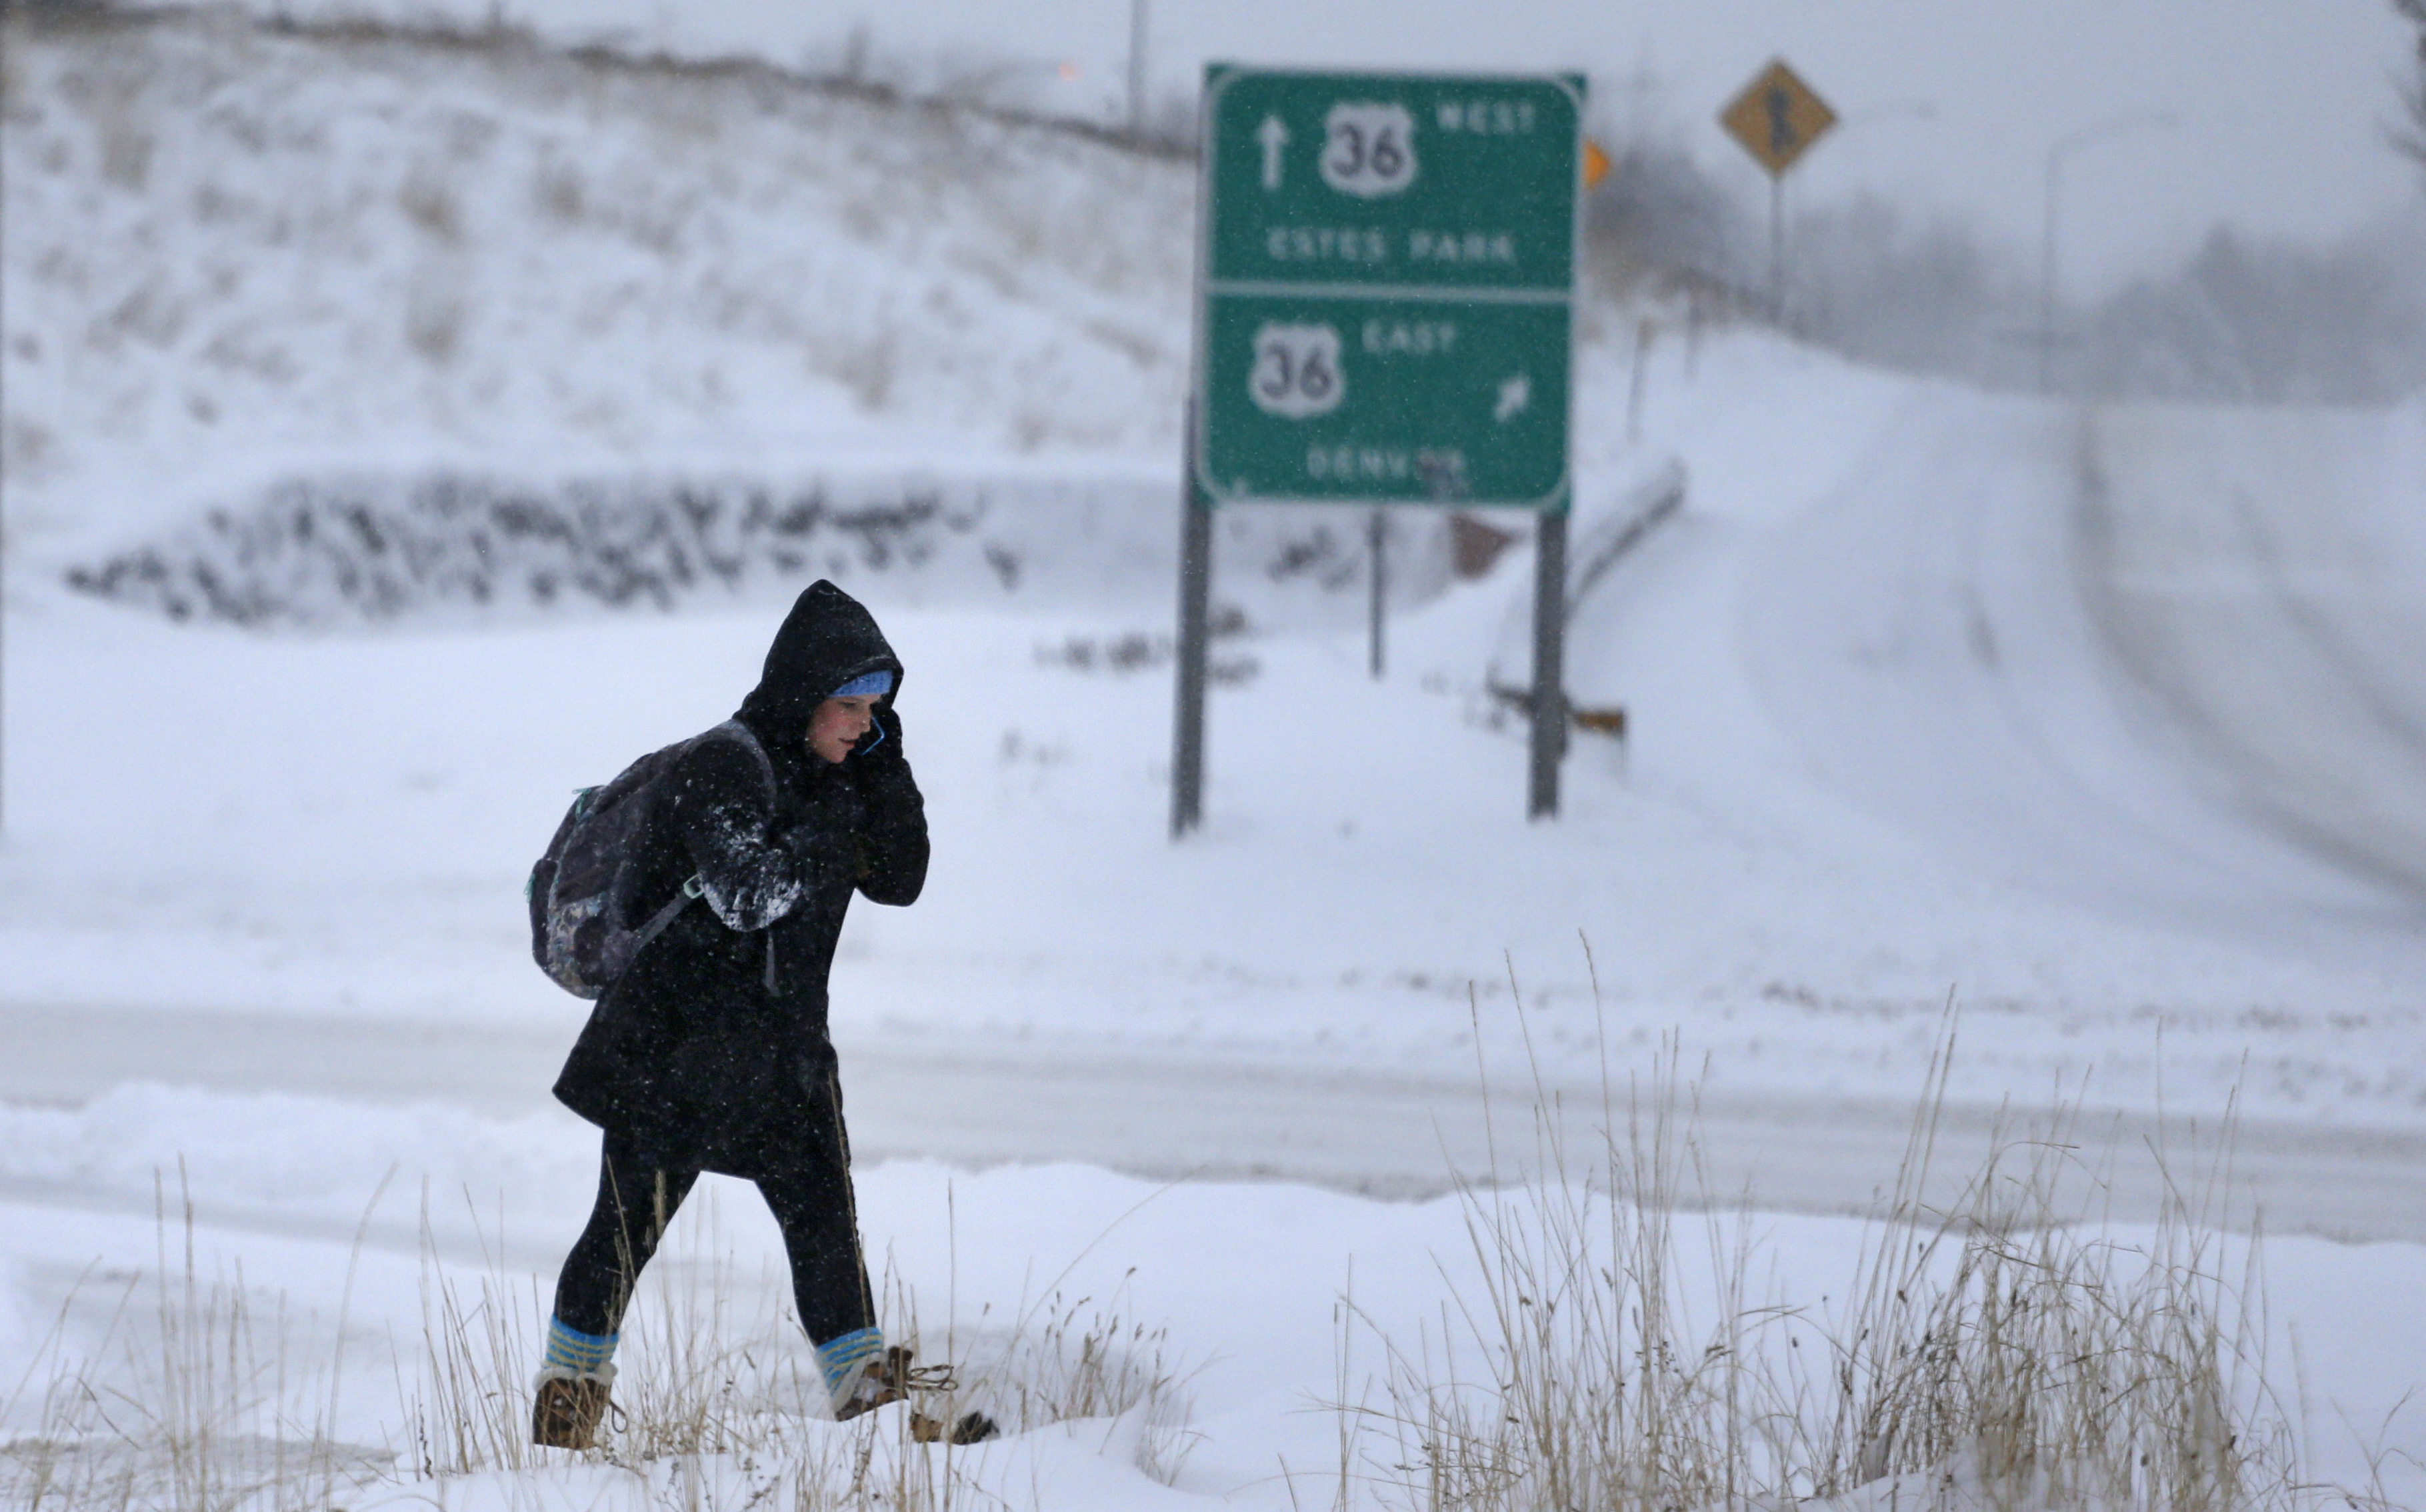 A pedestrian crosses a road after a night of heavy snowfall, in Boulder, Colo., Tuesday, Dec. 15, 2015. The biggest winter storm to hit the Denver area so far this season has left most schools closed and created some havoc on the roads for those forced to commute. (AP Photo/Brennan Linsley)